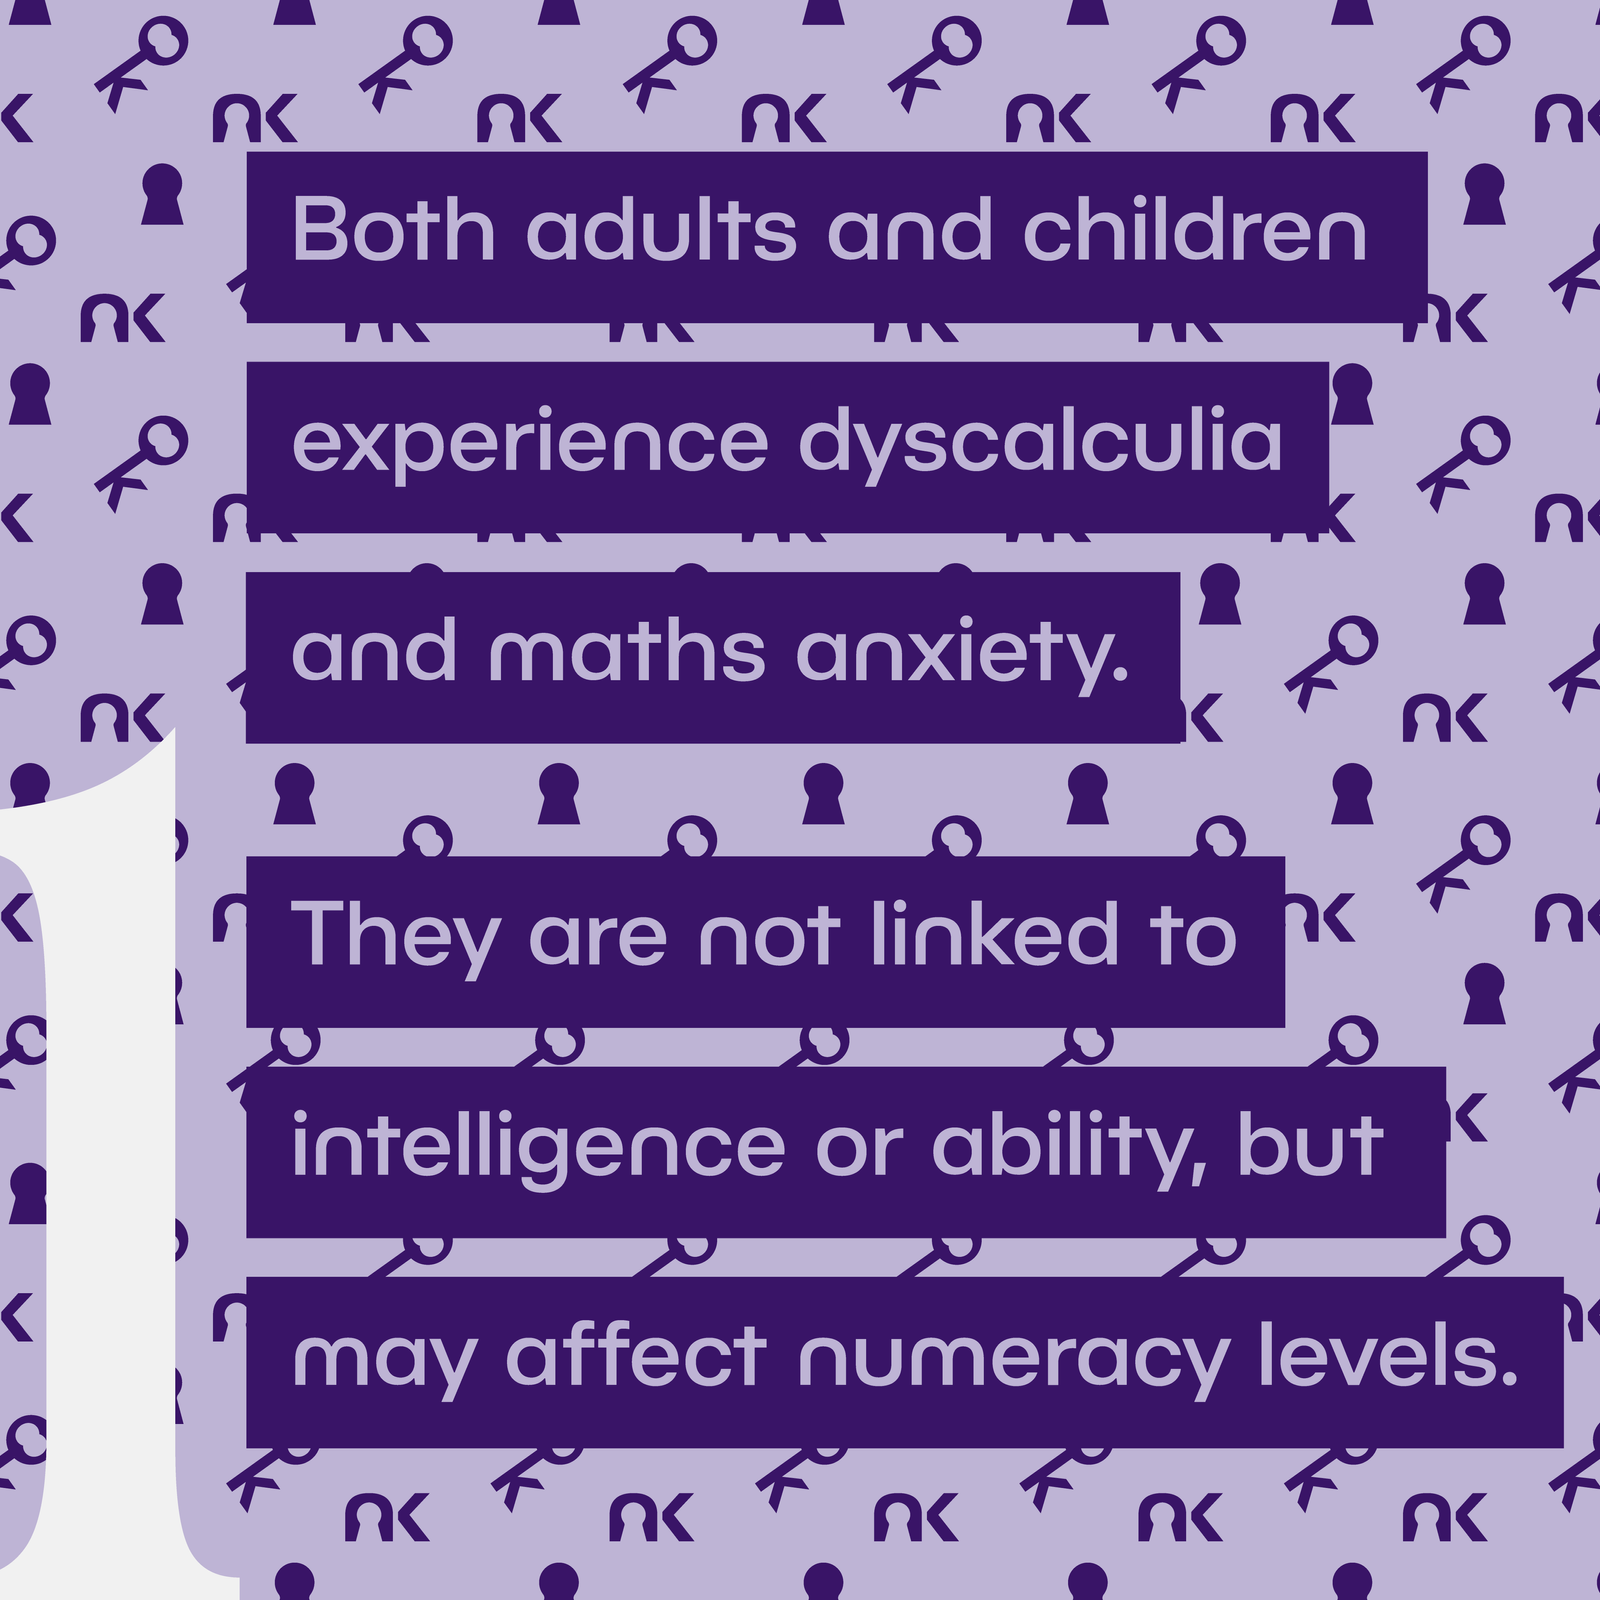 Text says: "Both adults and children experience dyscalculia and maths anxiety. They are not linked to intelligence or ability, but may affect numeracy levels."